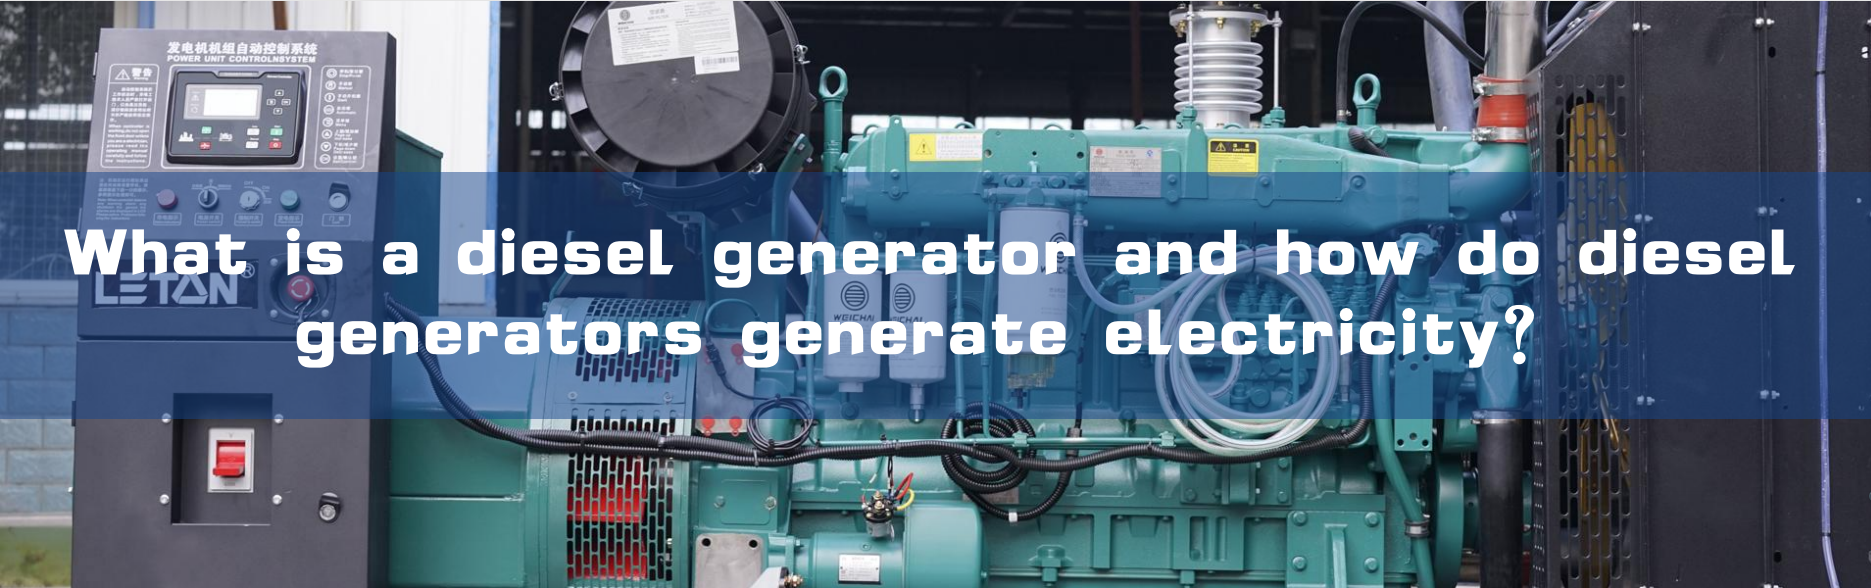 What is a diesel generator and how do diesel generators generate electricity？